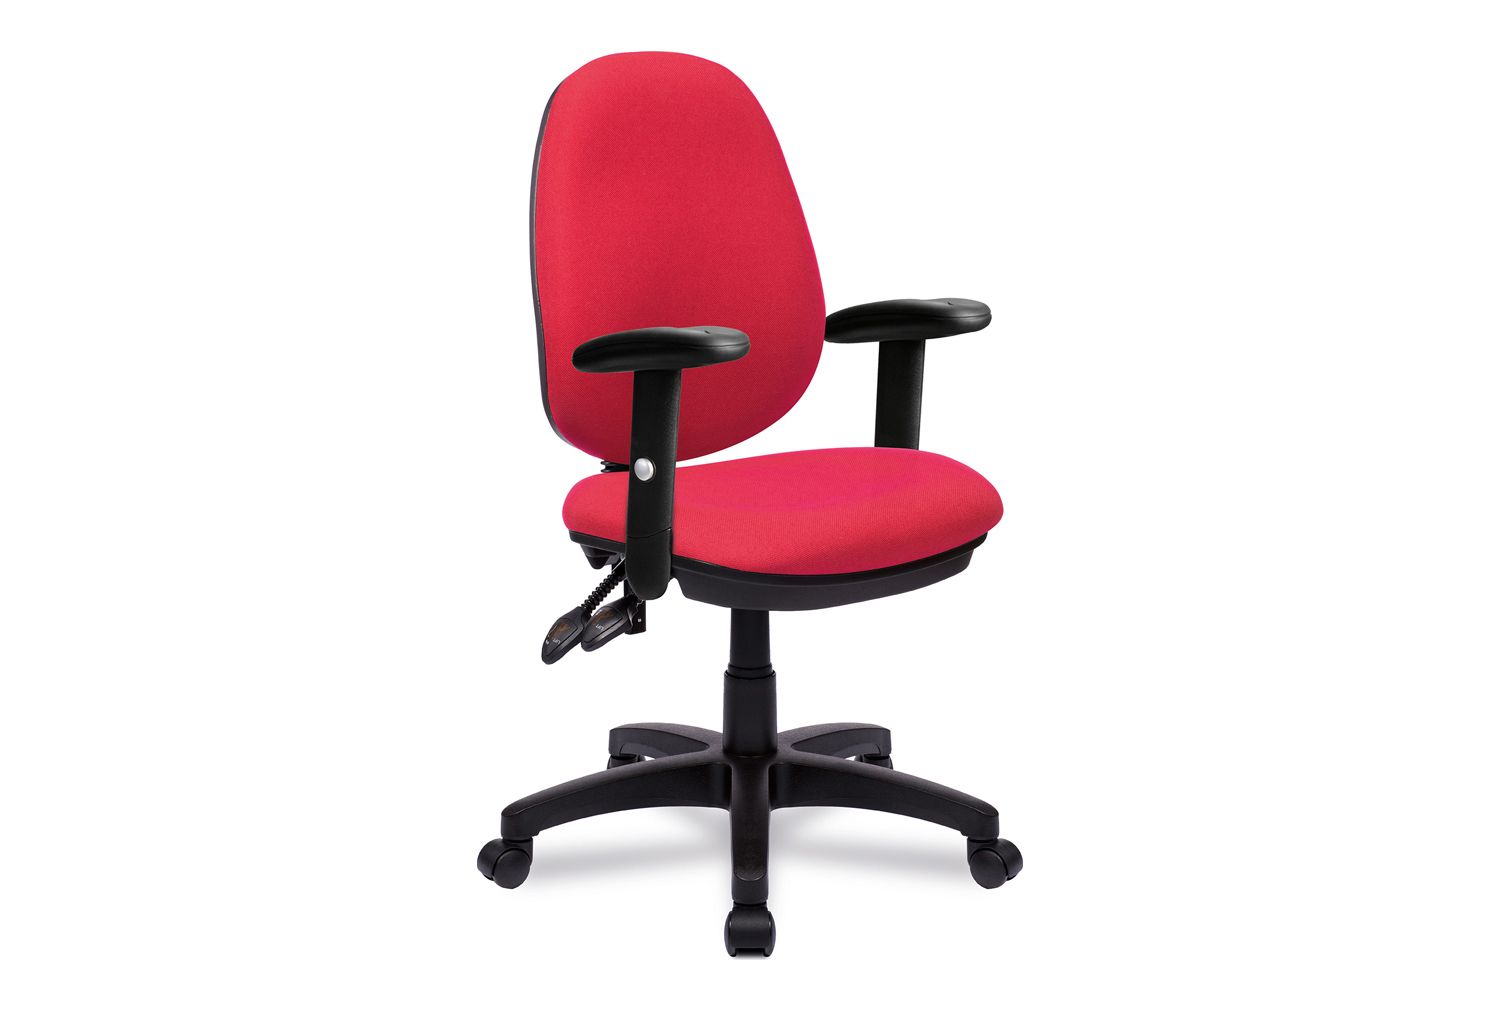 Mineo 3 Lever Operator Office Chair With Adjustable Arms, Wine, Fully Installed